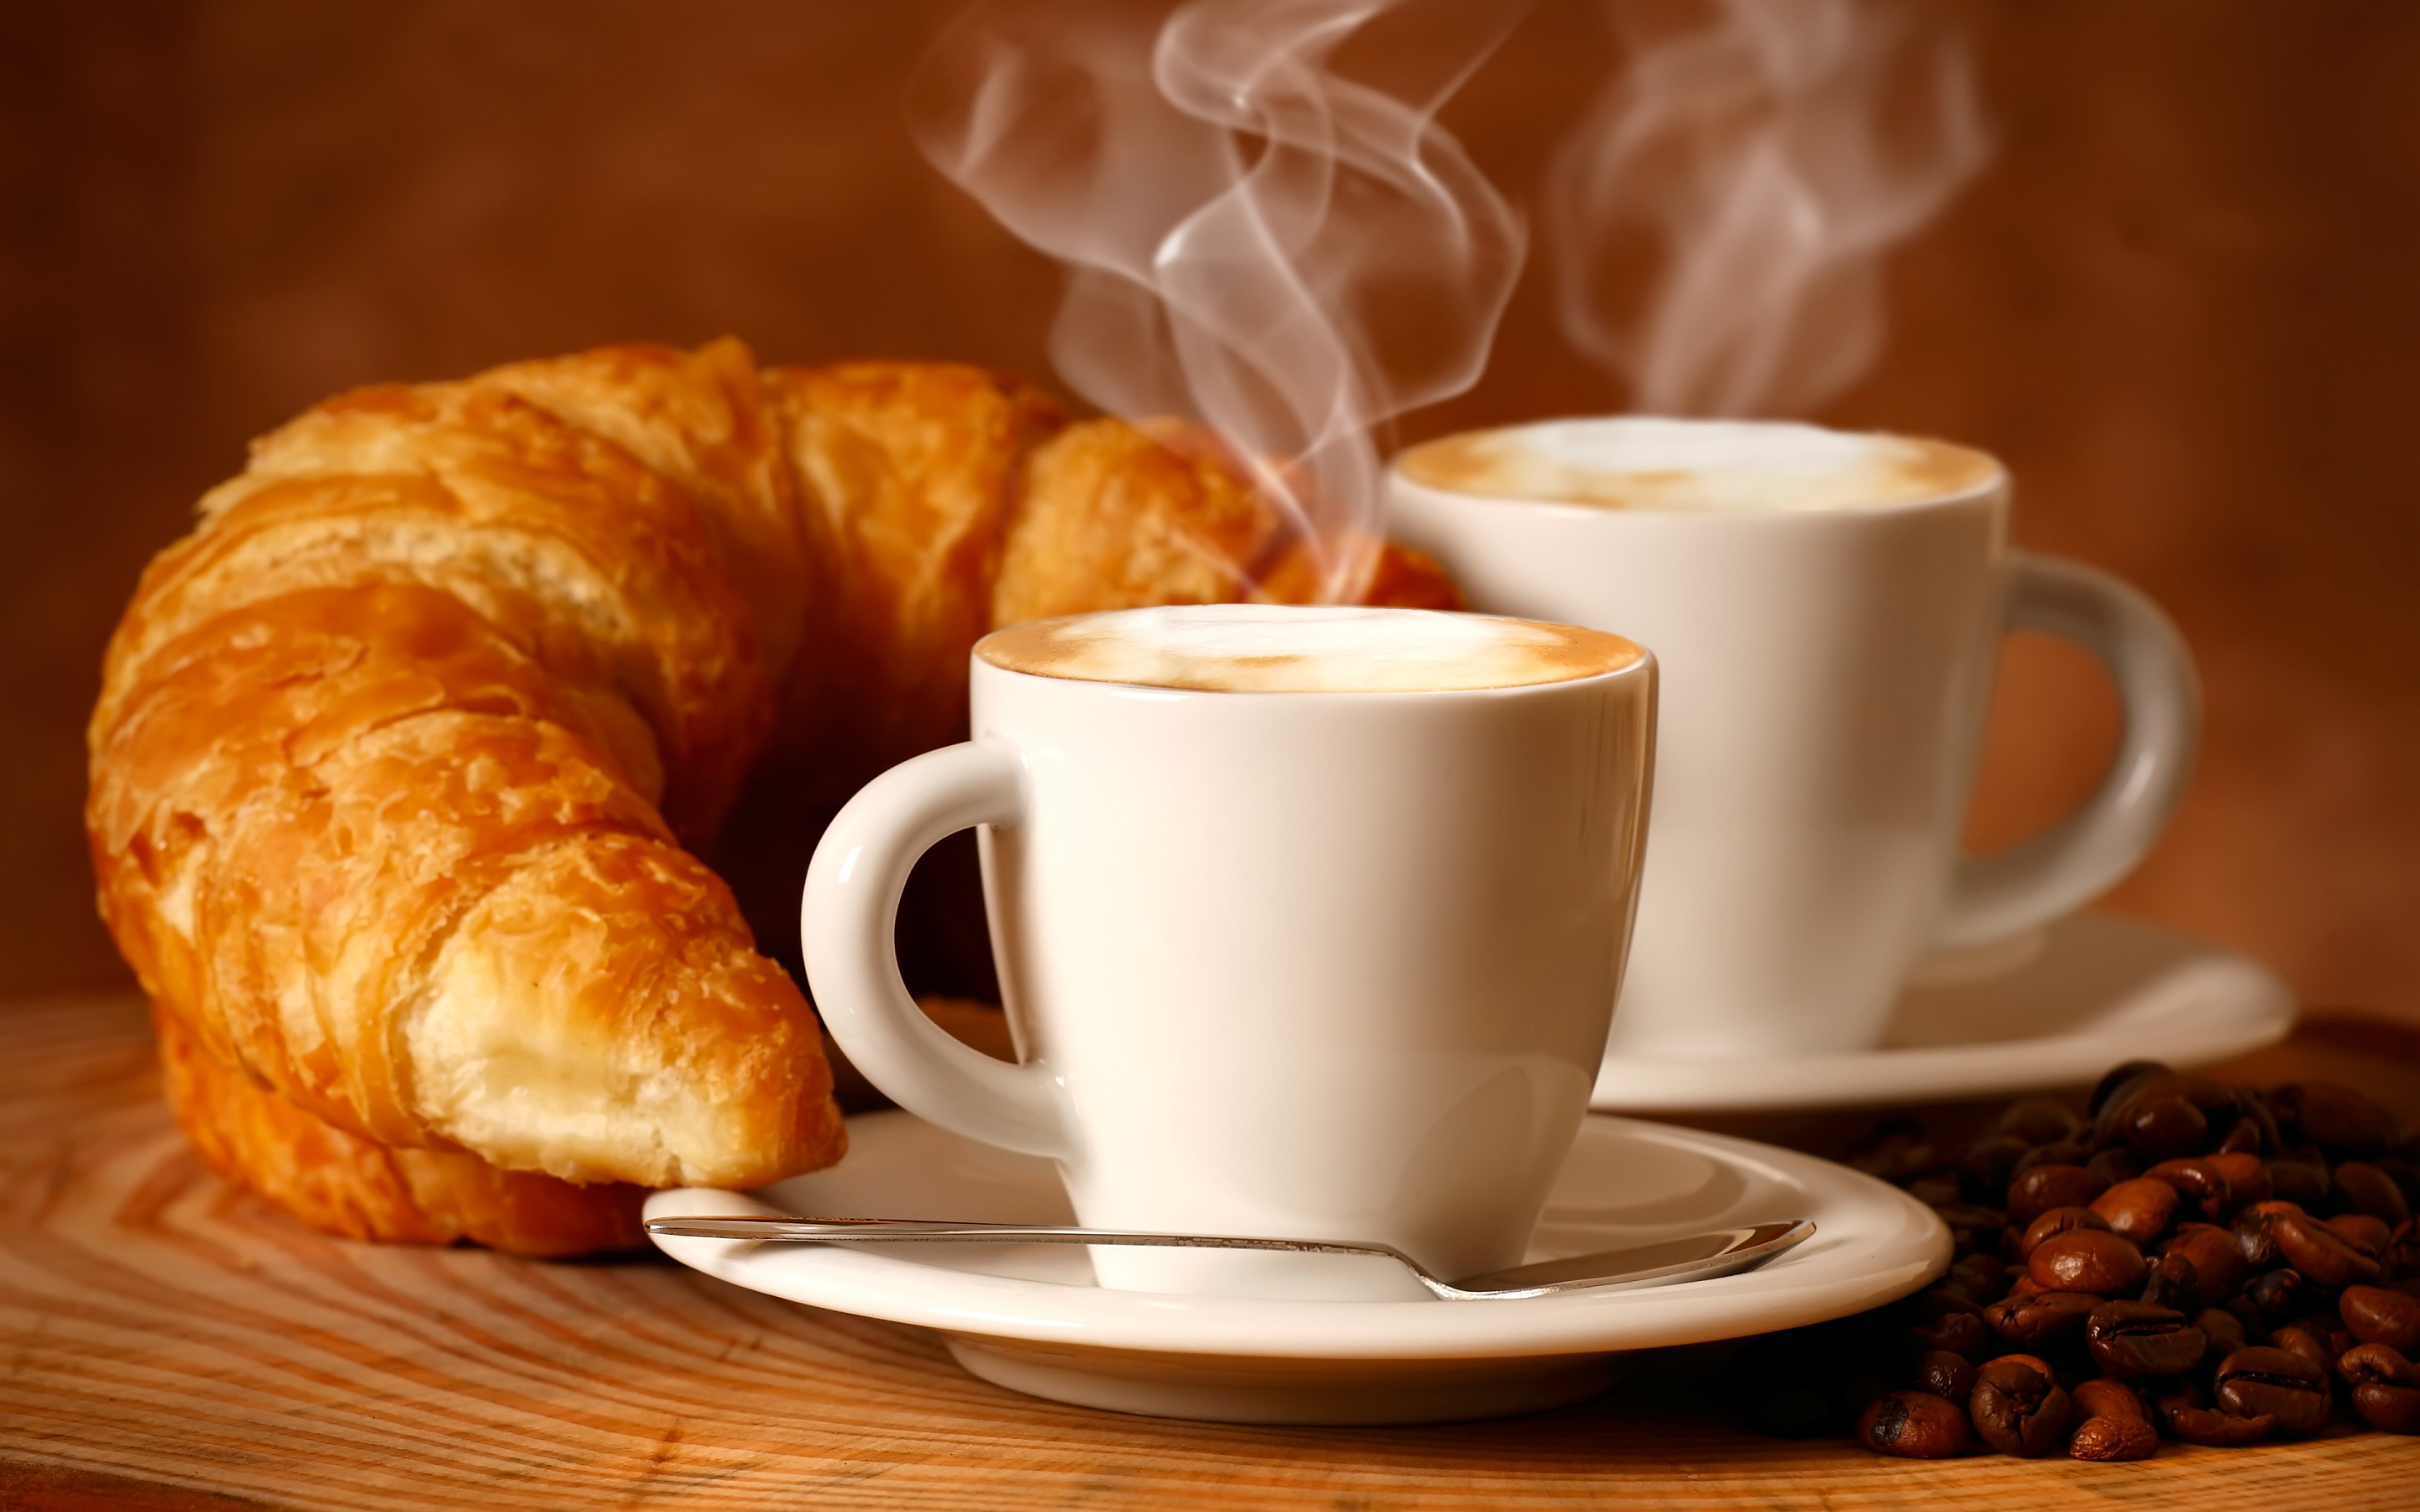 breakfast wallpaper,croissant,cup,coffee cup,food,cappuccino